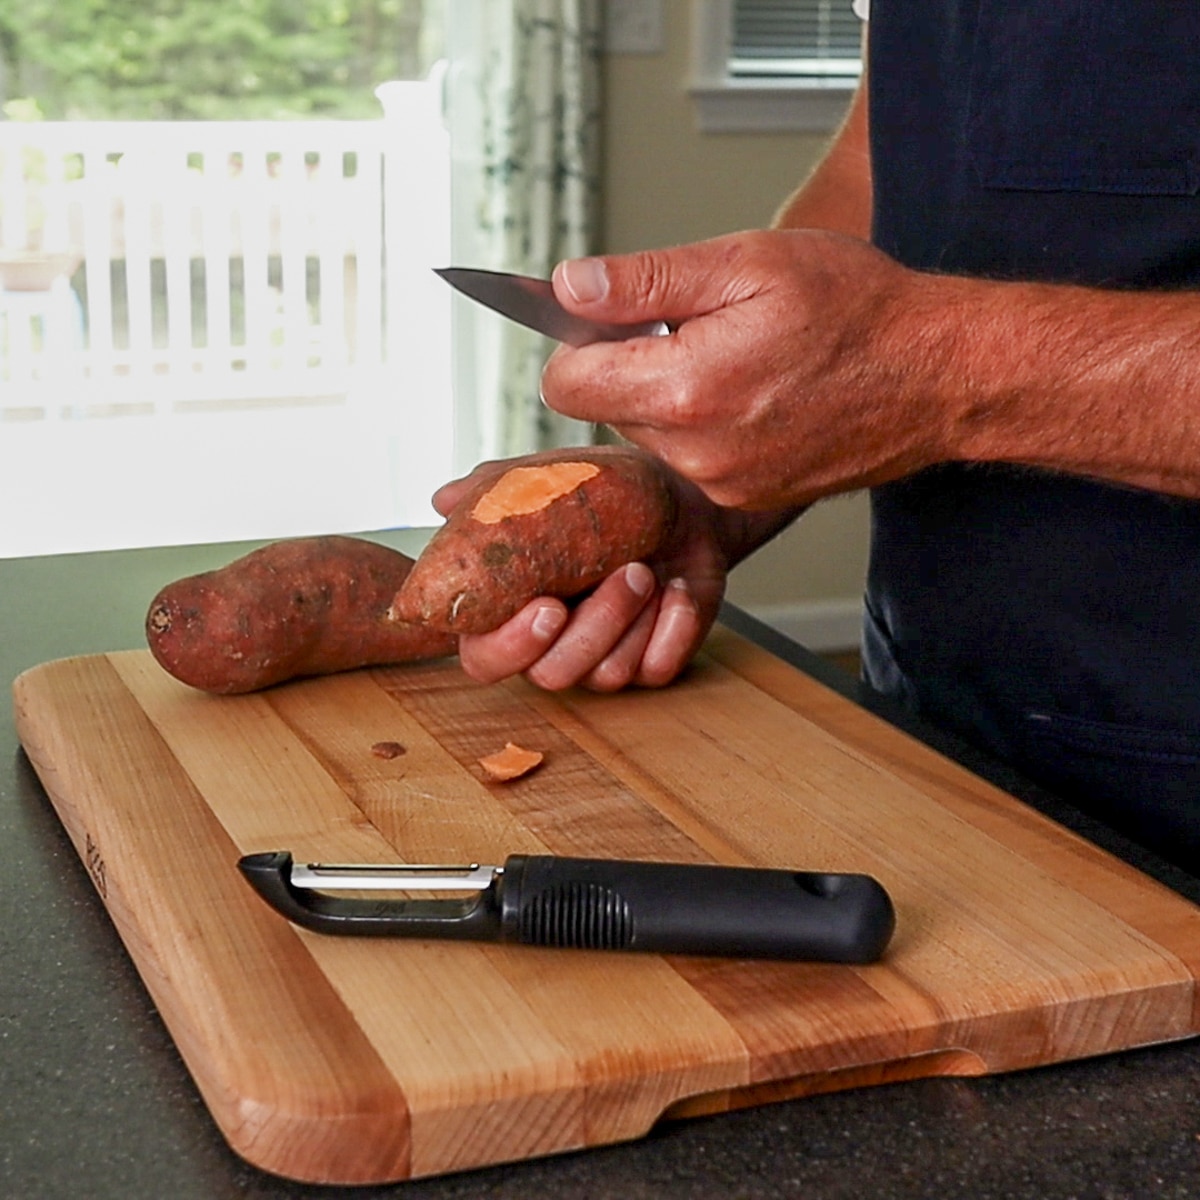 Use a pairing knife and peeler to peel the potatoes.